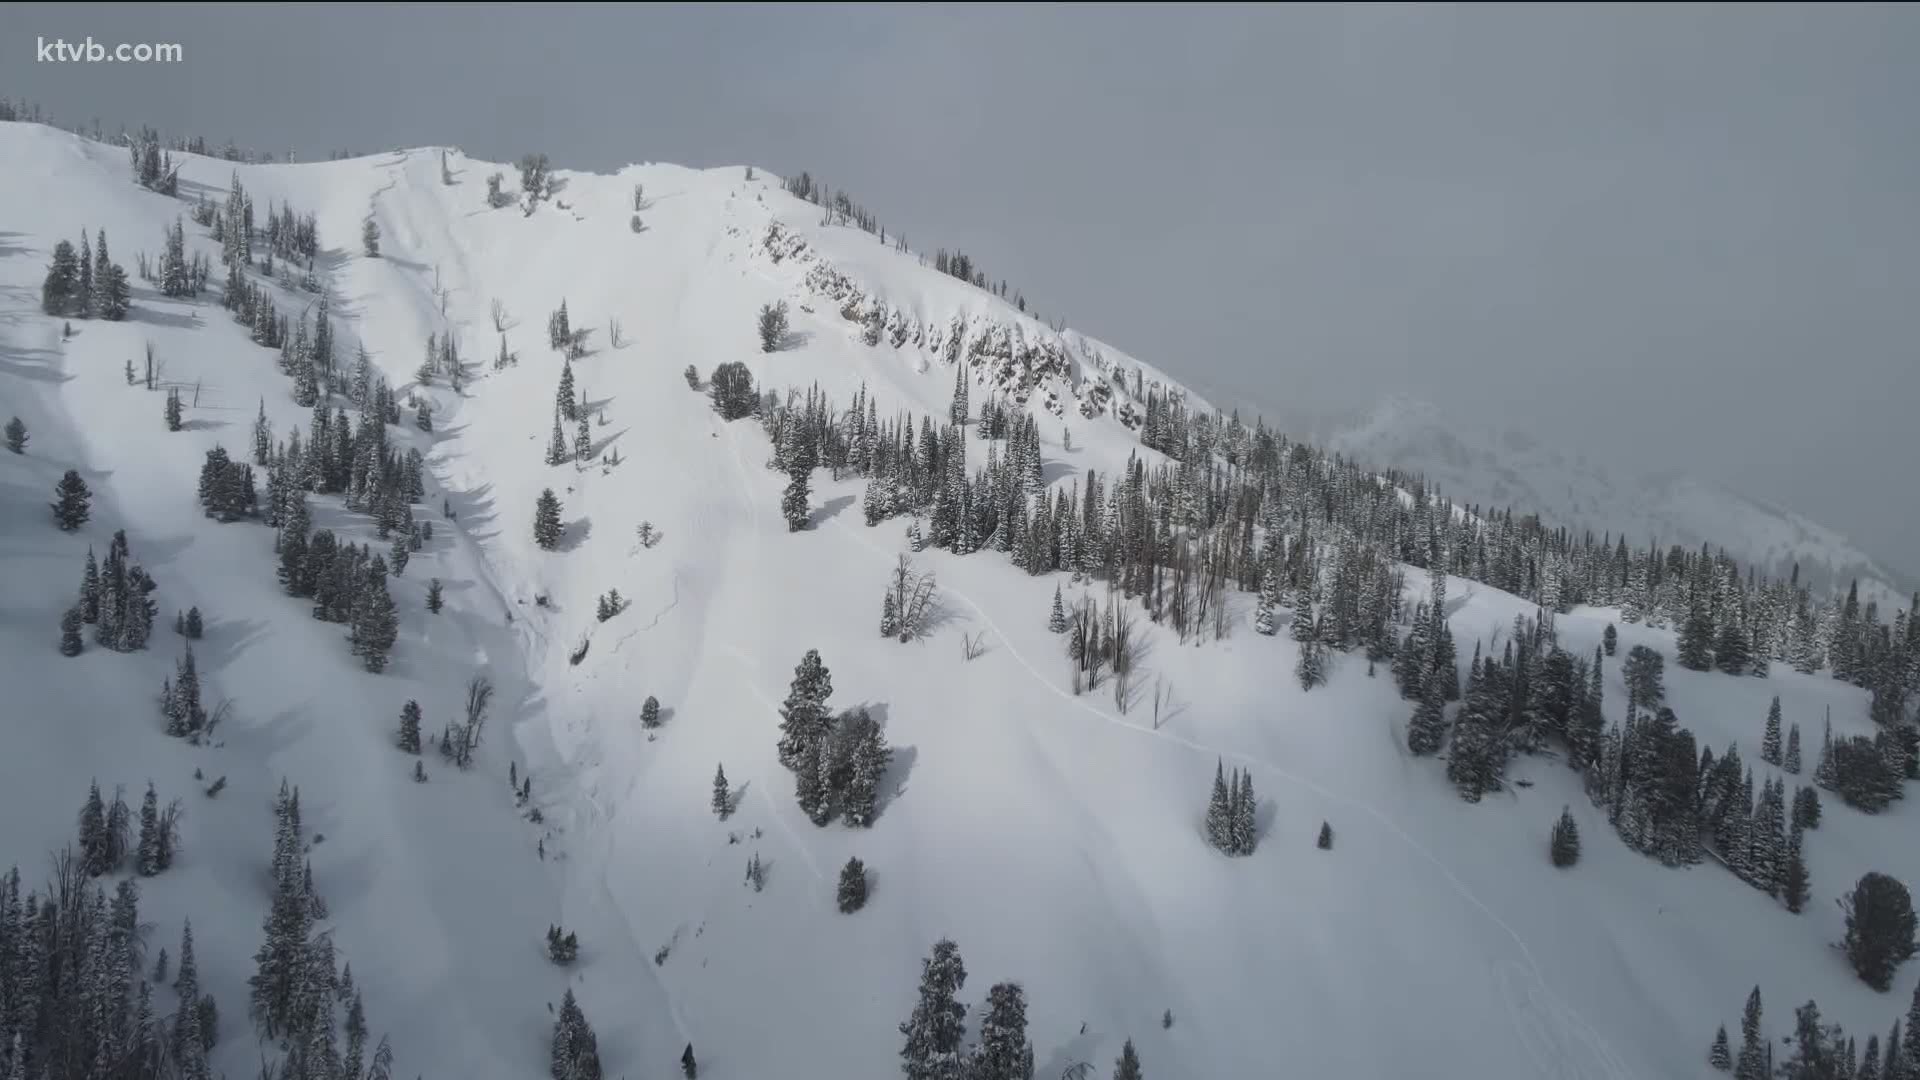 Staff from the U.S. Forest Service Avalanche Center examined the avalanche site on Friday.